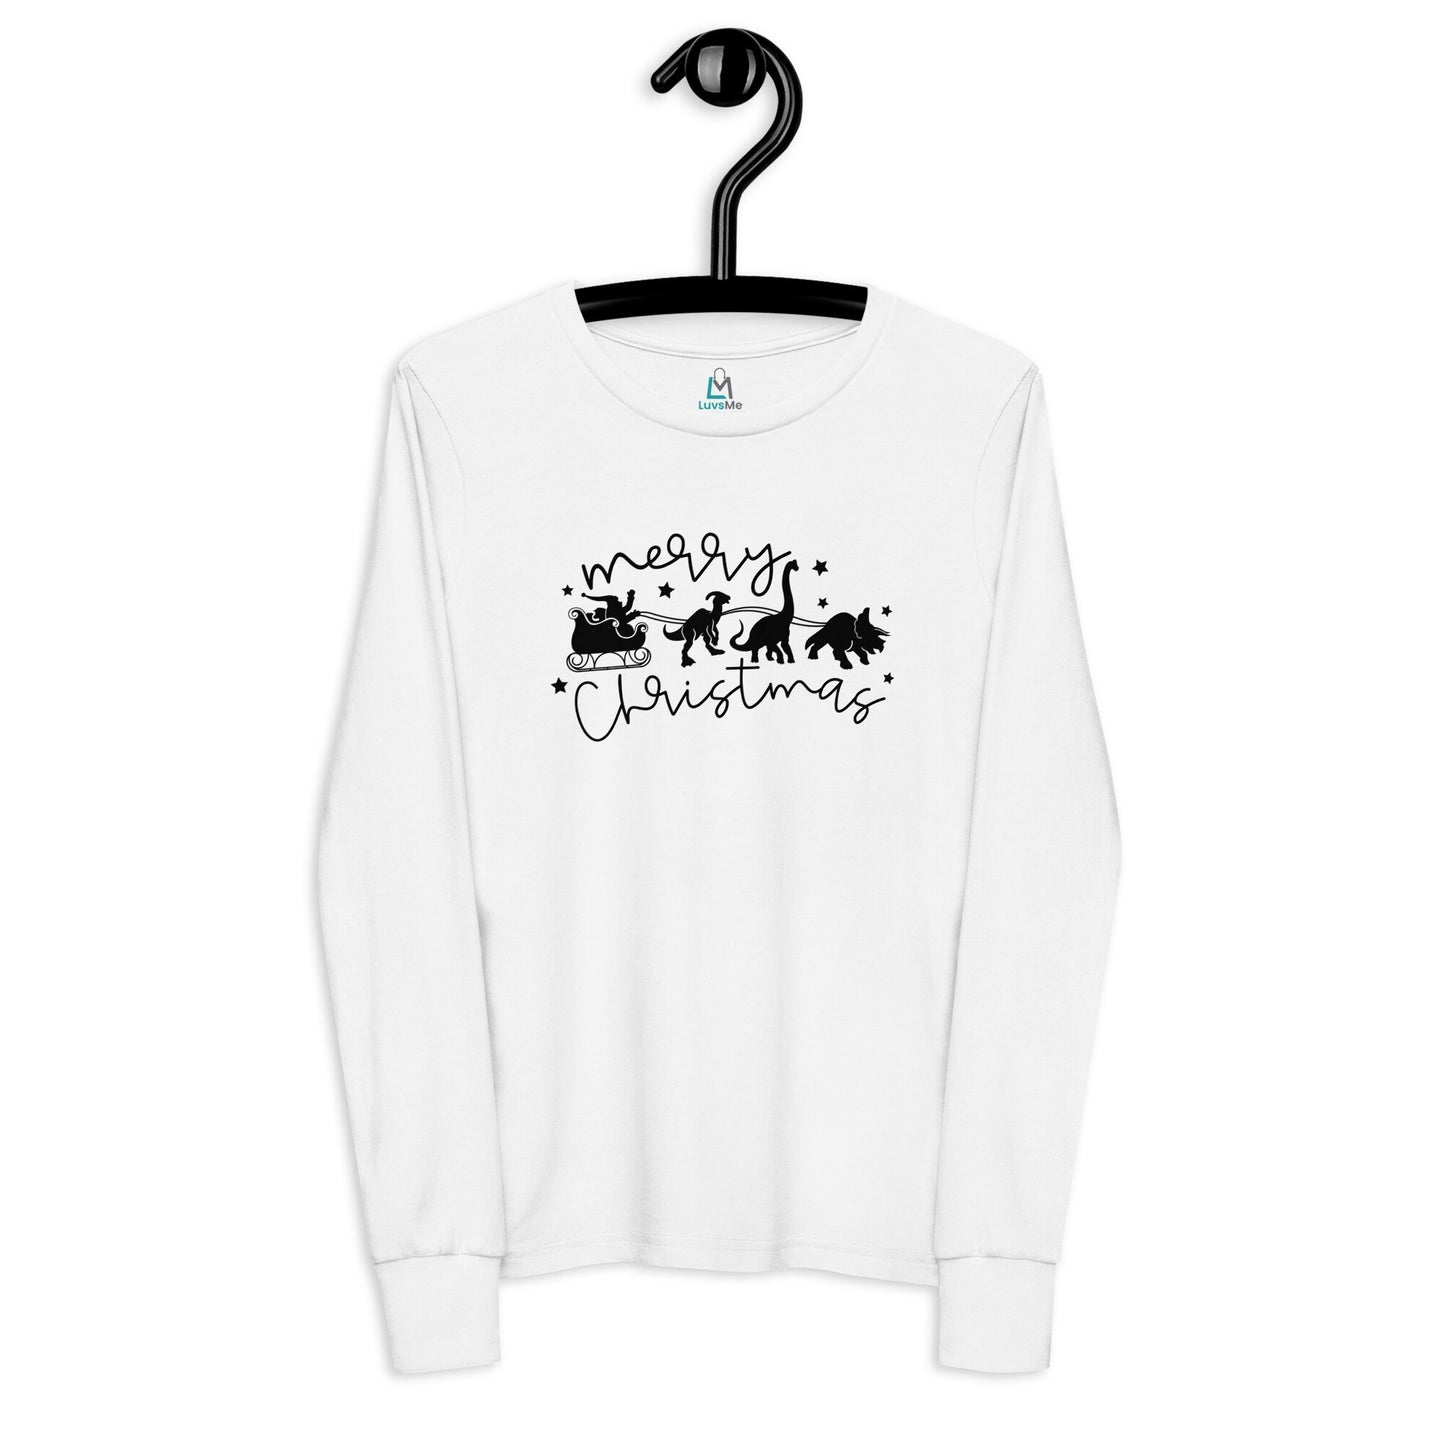 Santa's Sleigh pulled by Dinosaurs - Funny Christmas - Youth long sleeve tee